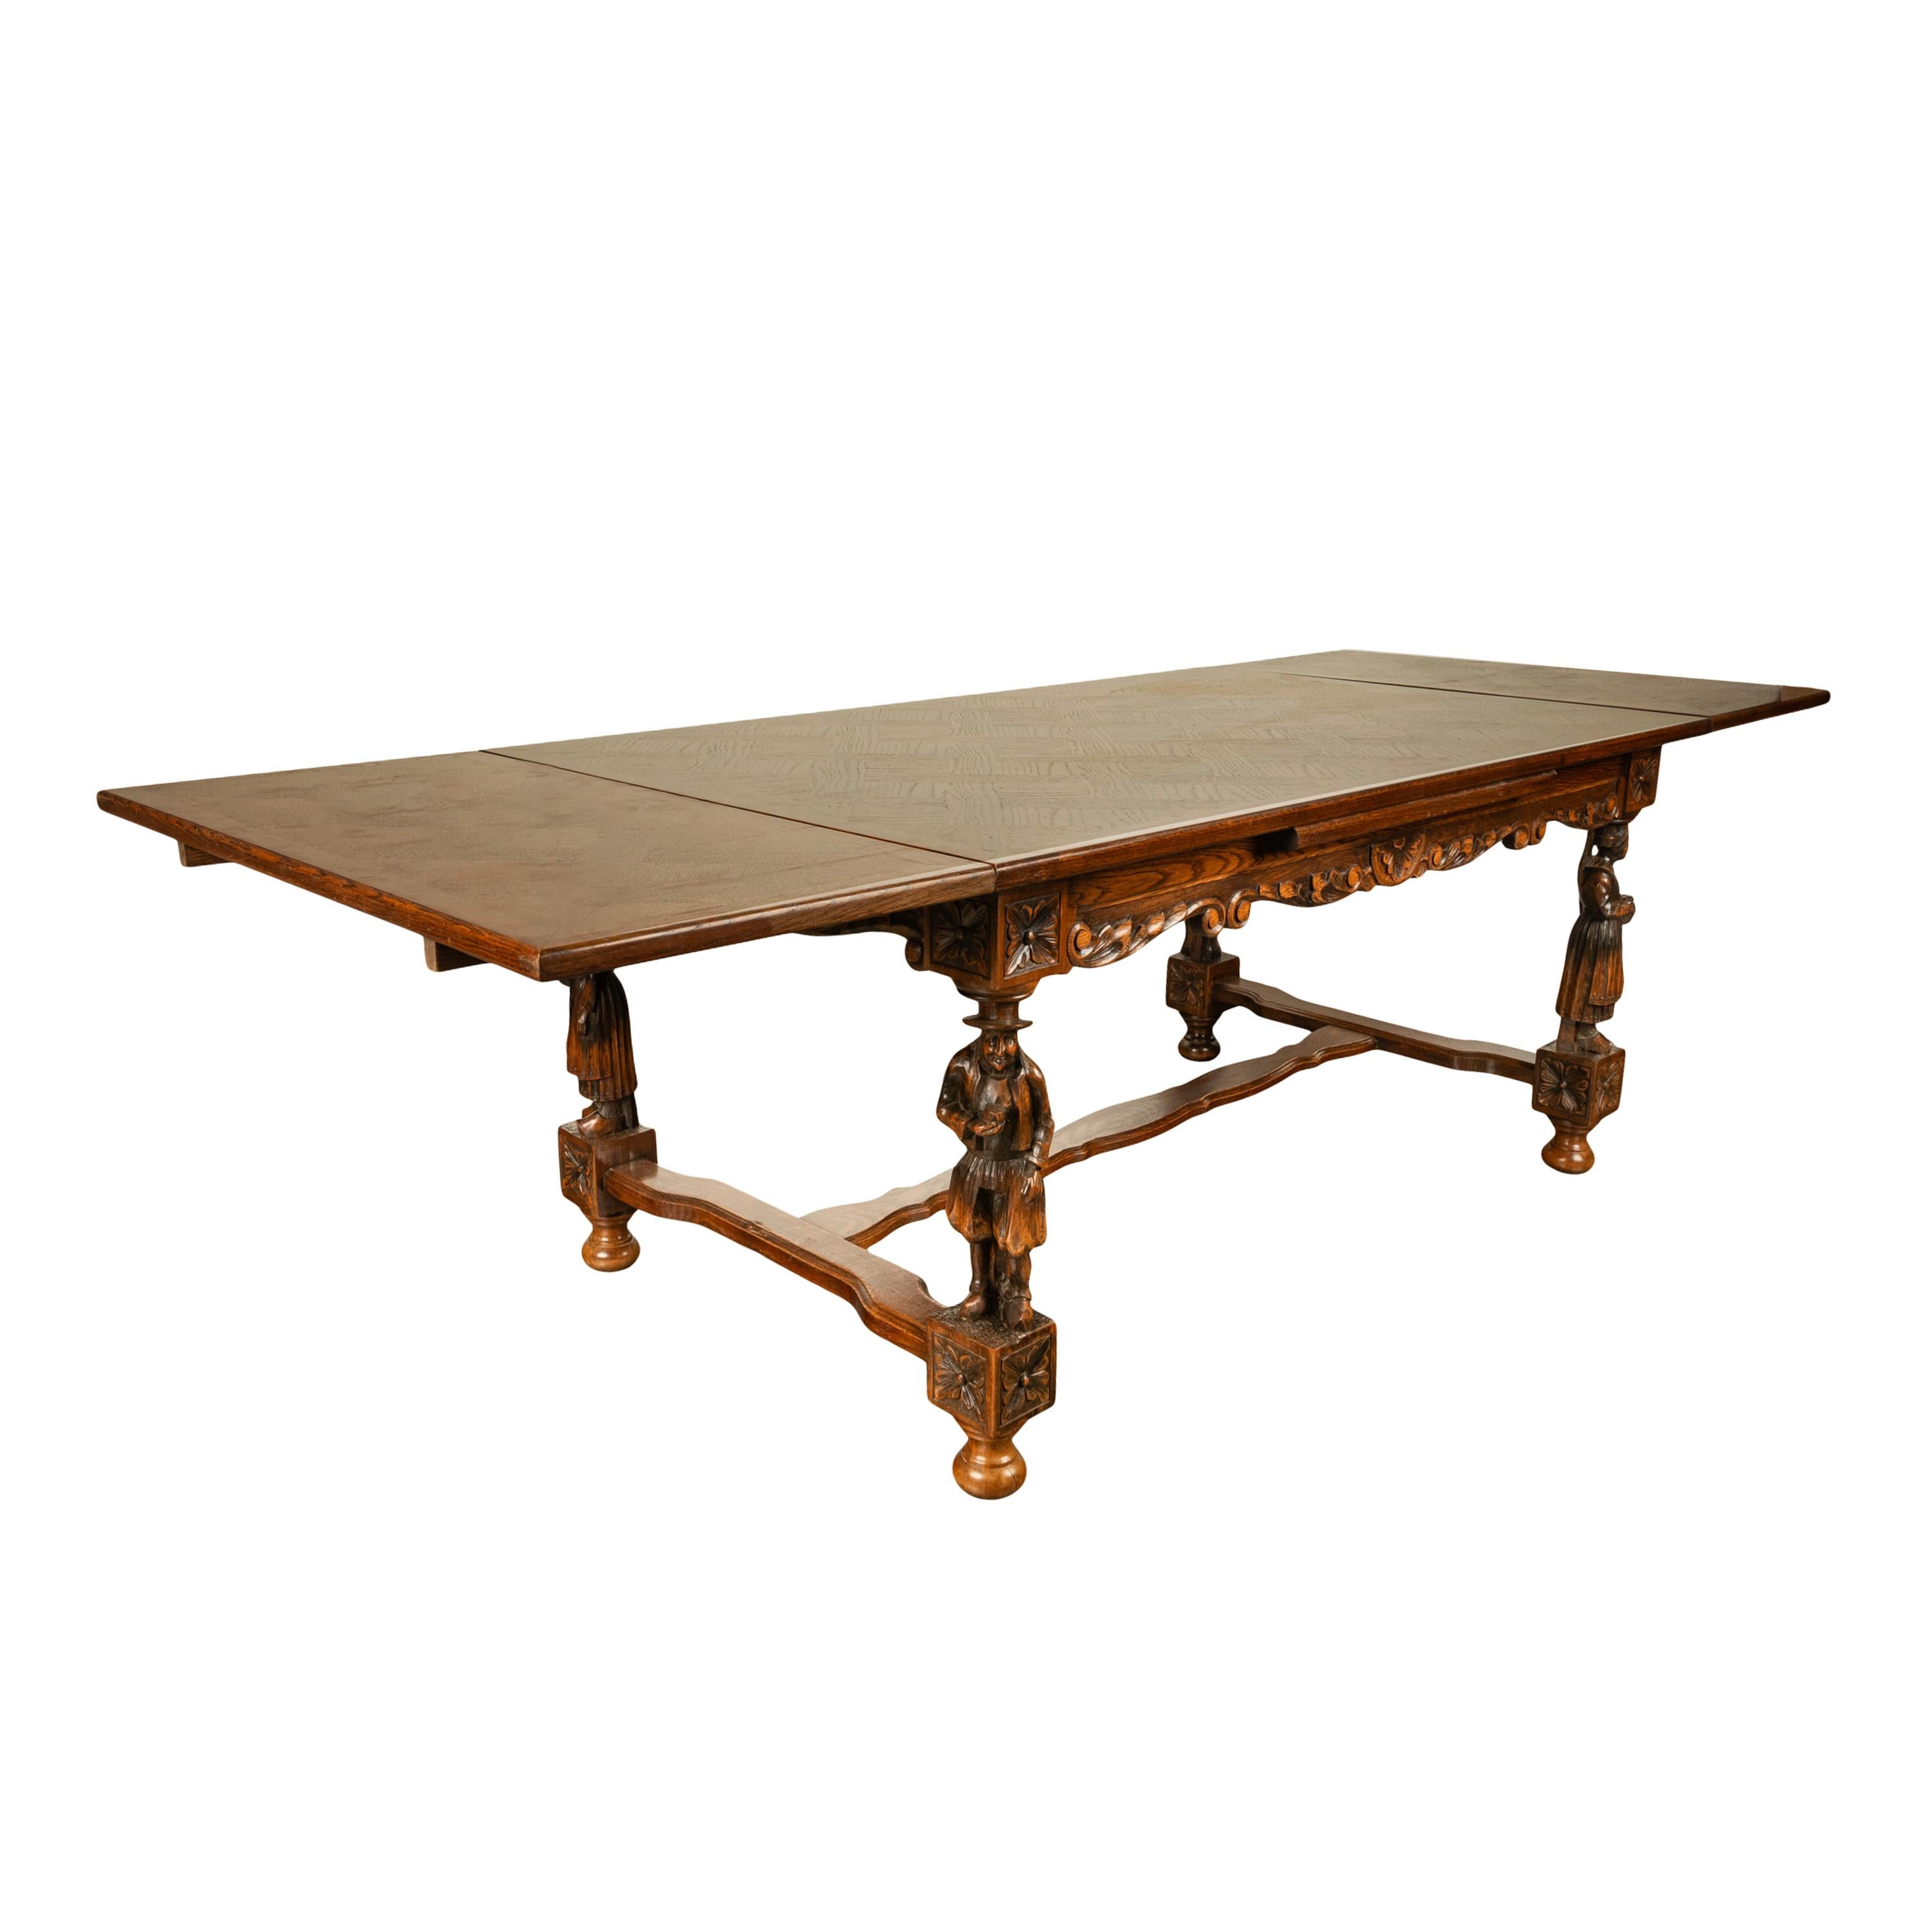 Oak Antique Carved Figural French Breton Inlaid Dining Extending Table Brittany 1900 For Sale